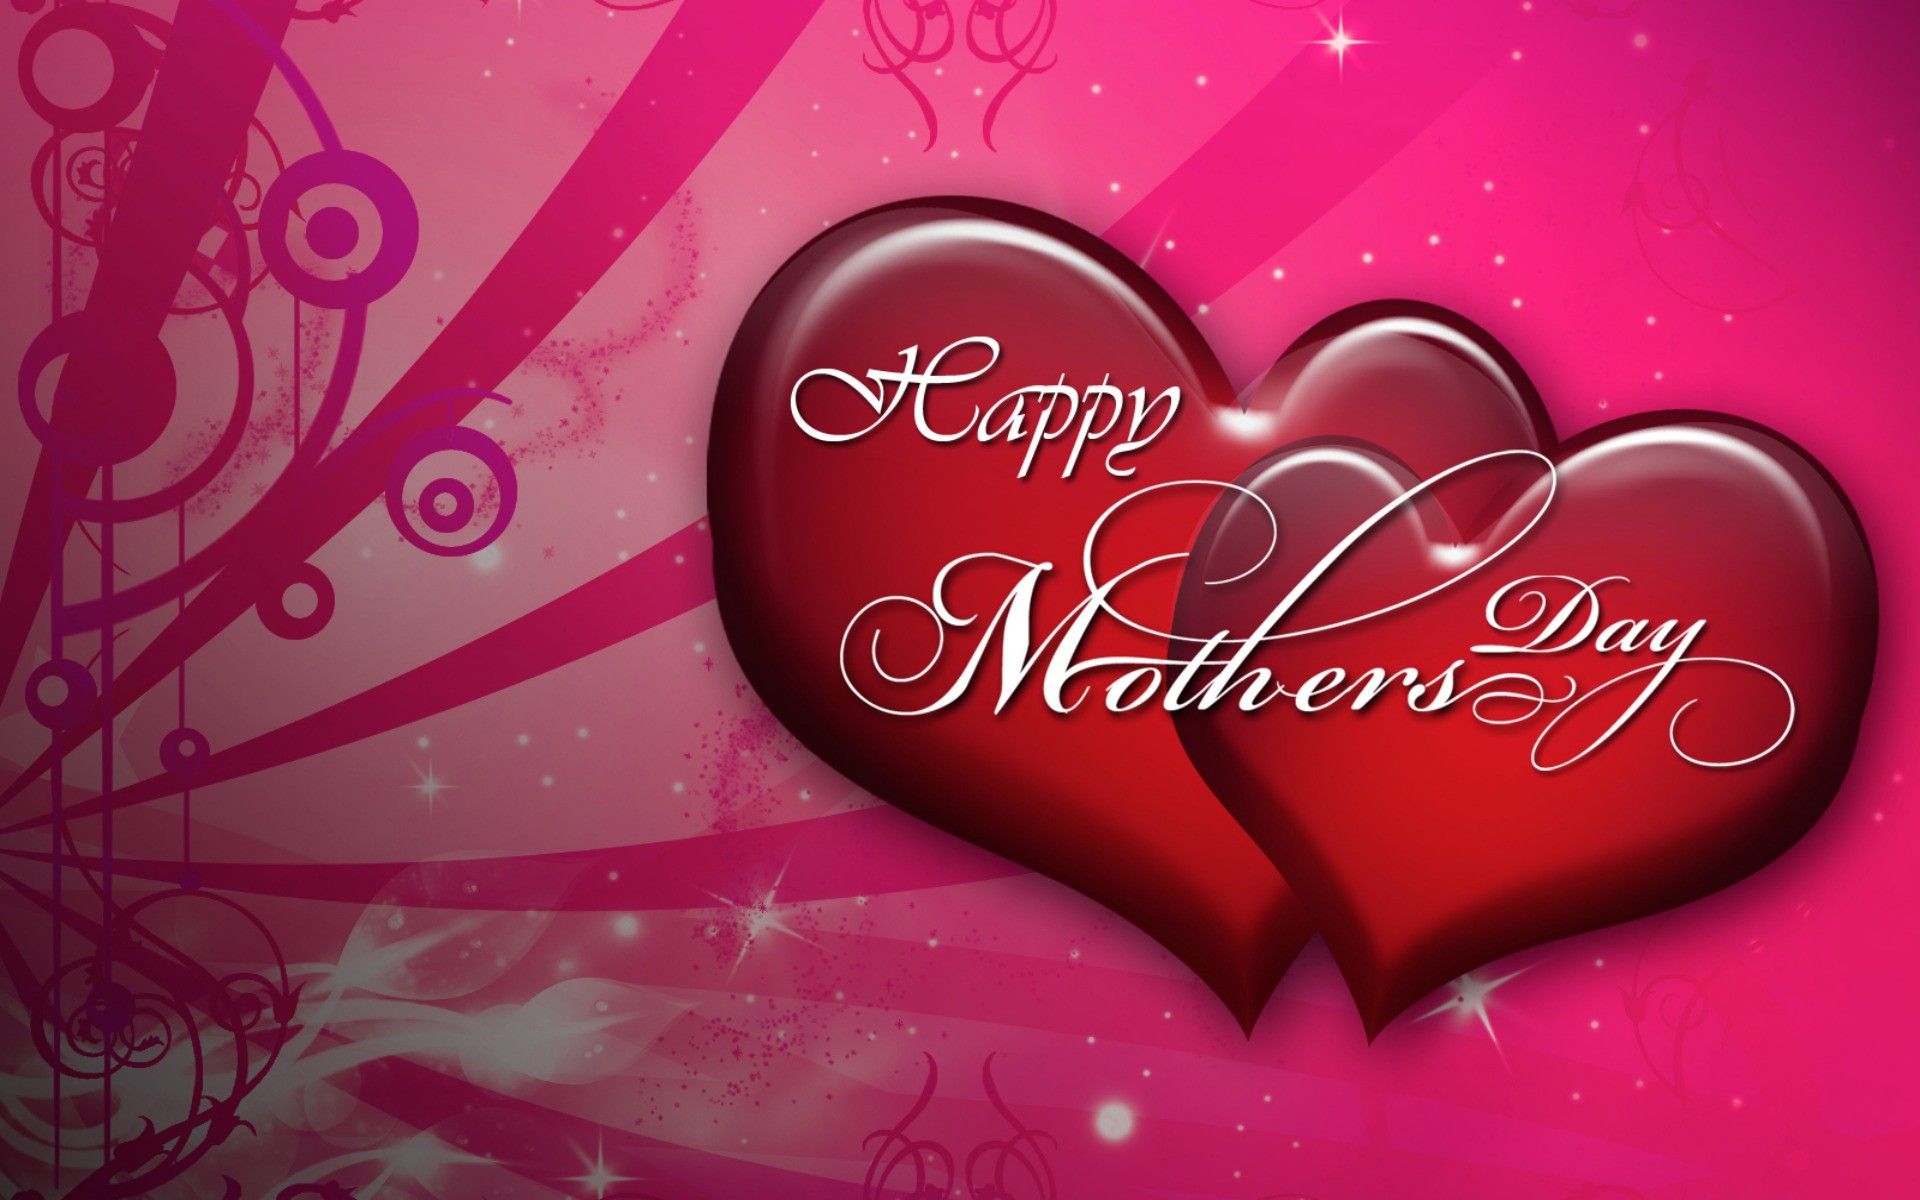 Mothers Day Wallpaperatozpicture.com